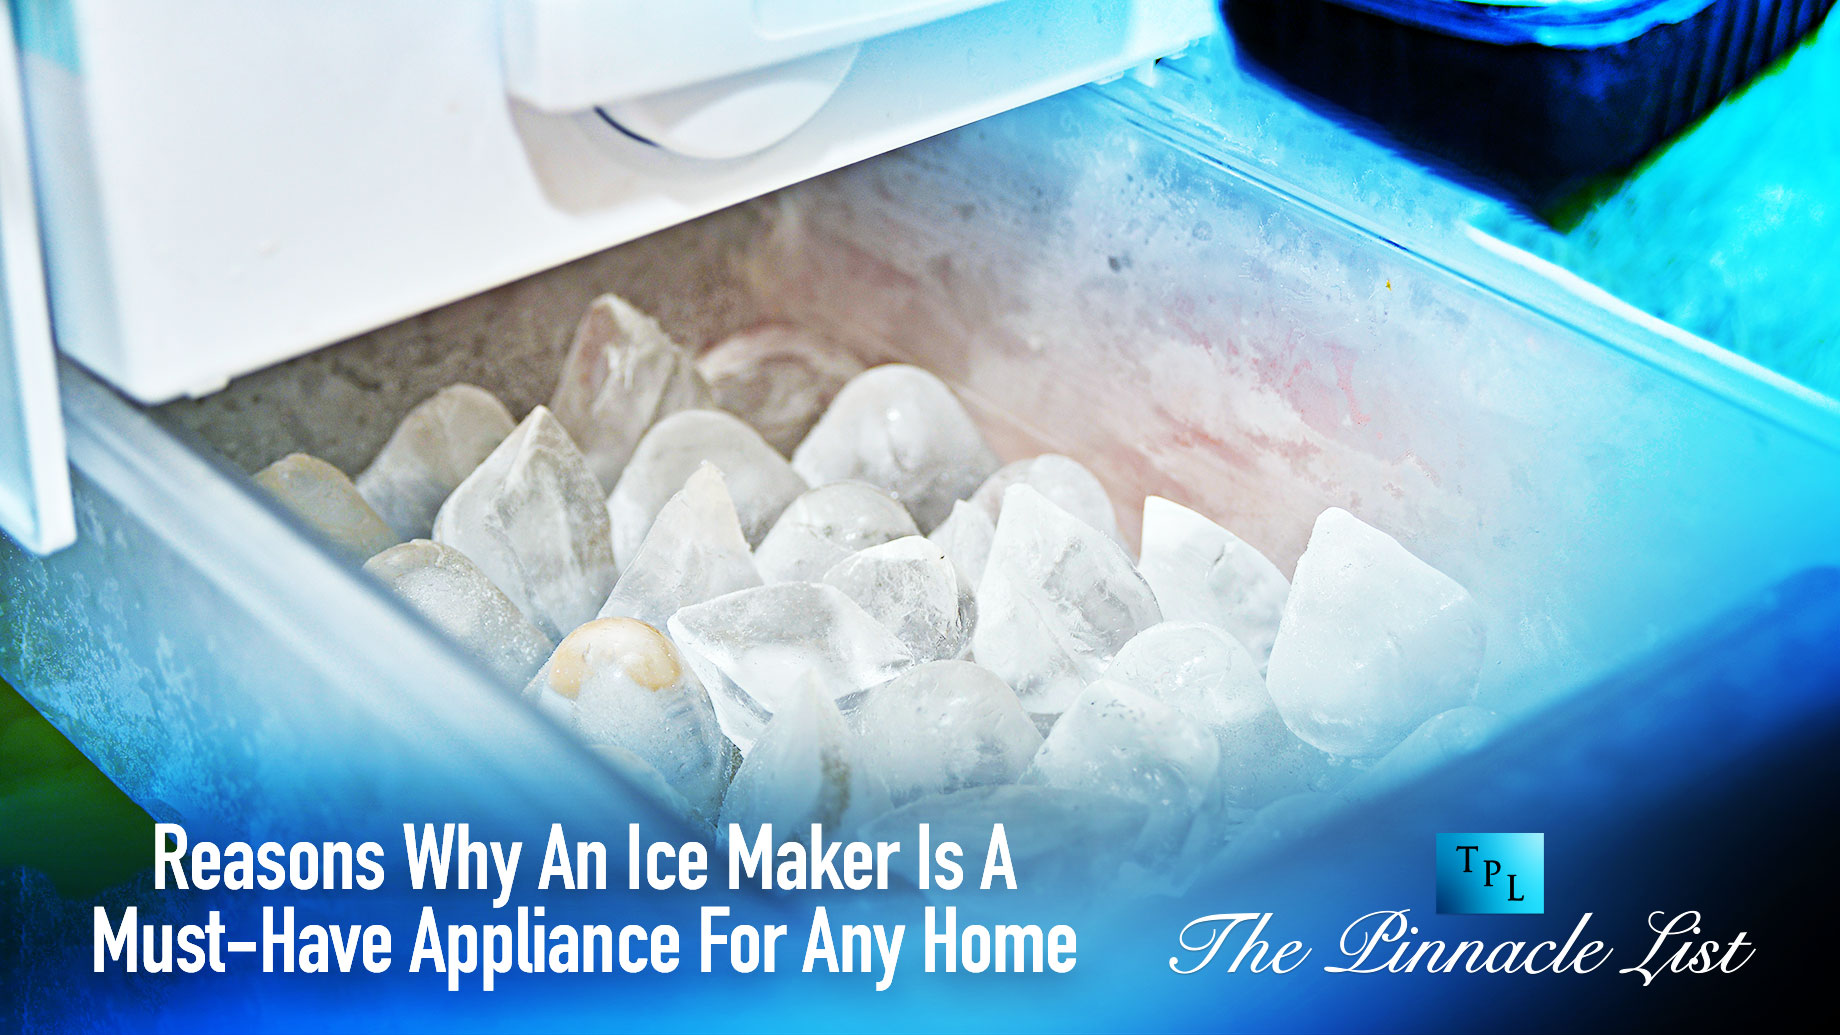 Reasons Why An Ice Maker Is A Must-Have Appliance For Any Home